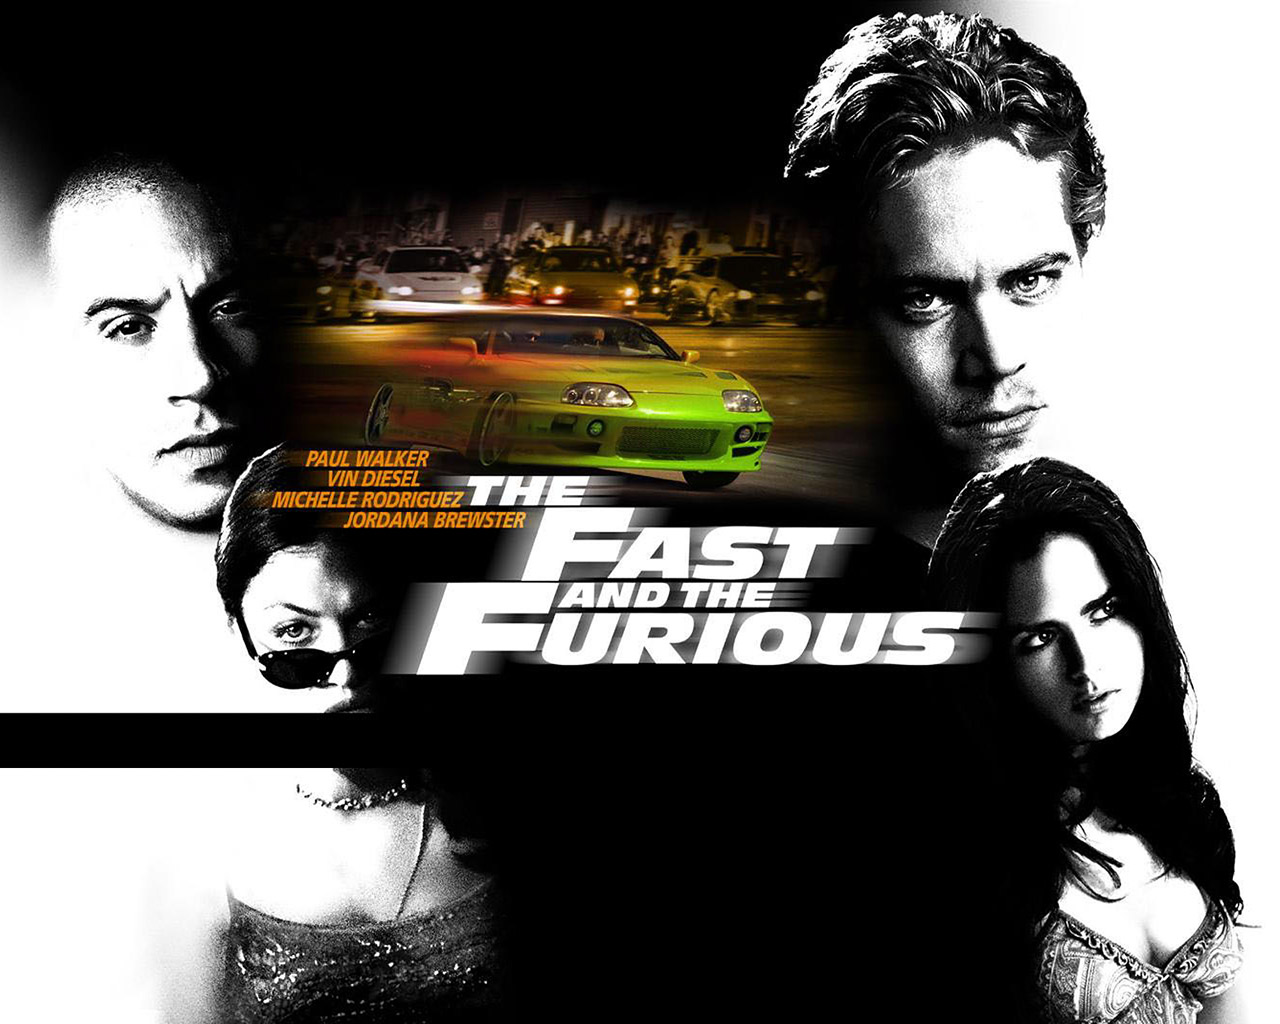 Palaeo After Dark - James and Curt Discuss "The Fast and the Furious" 1 and  2